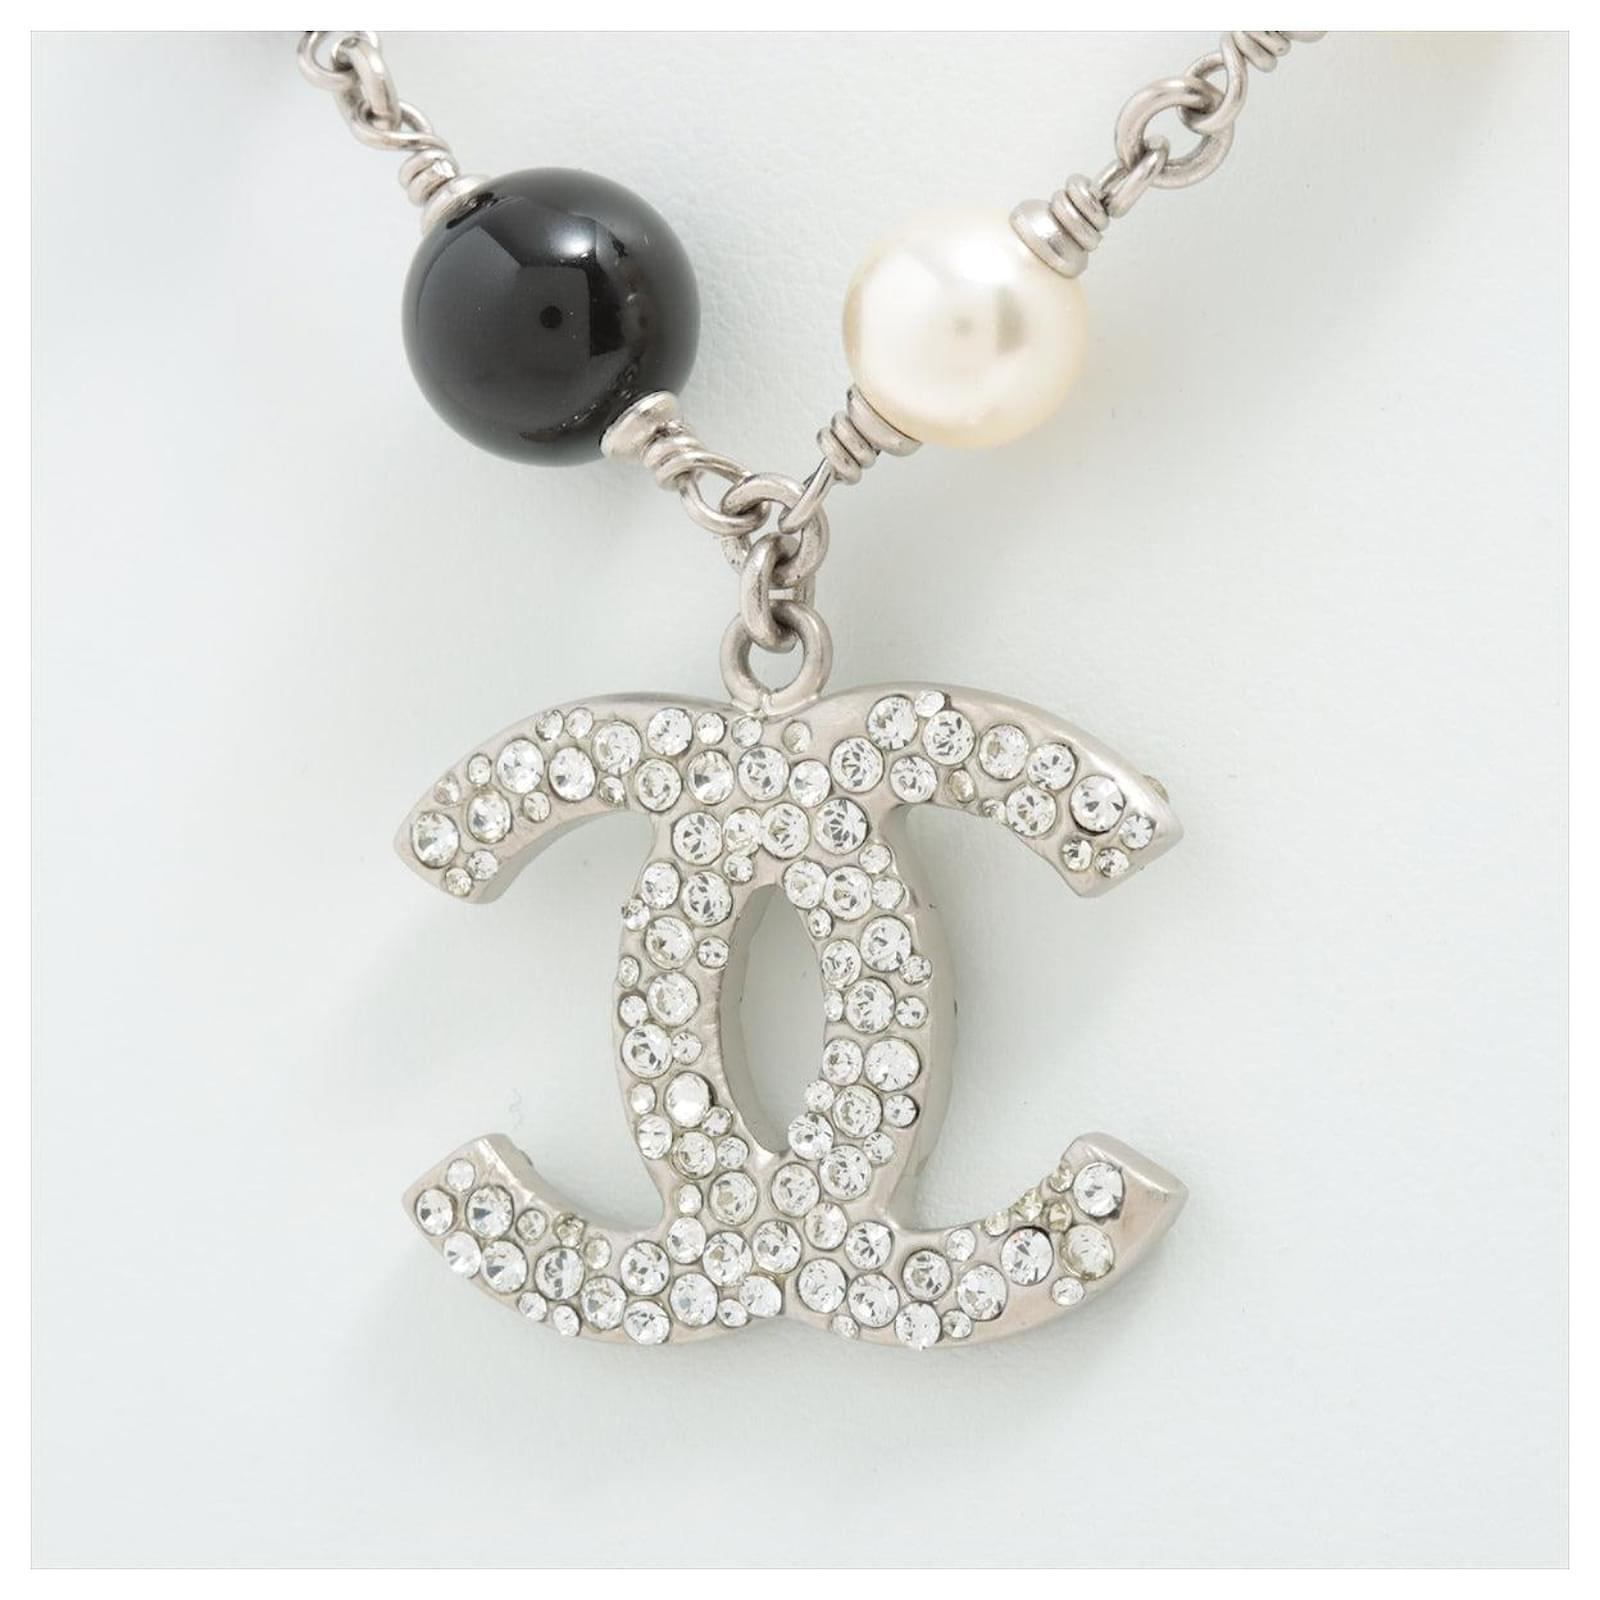 Authentic Second Hand Chanel Crystal CC Necklace PSSA9700004  THE  FIFTH COLLECTION